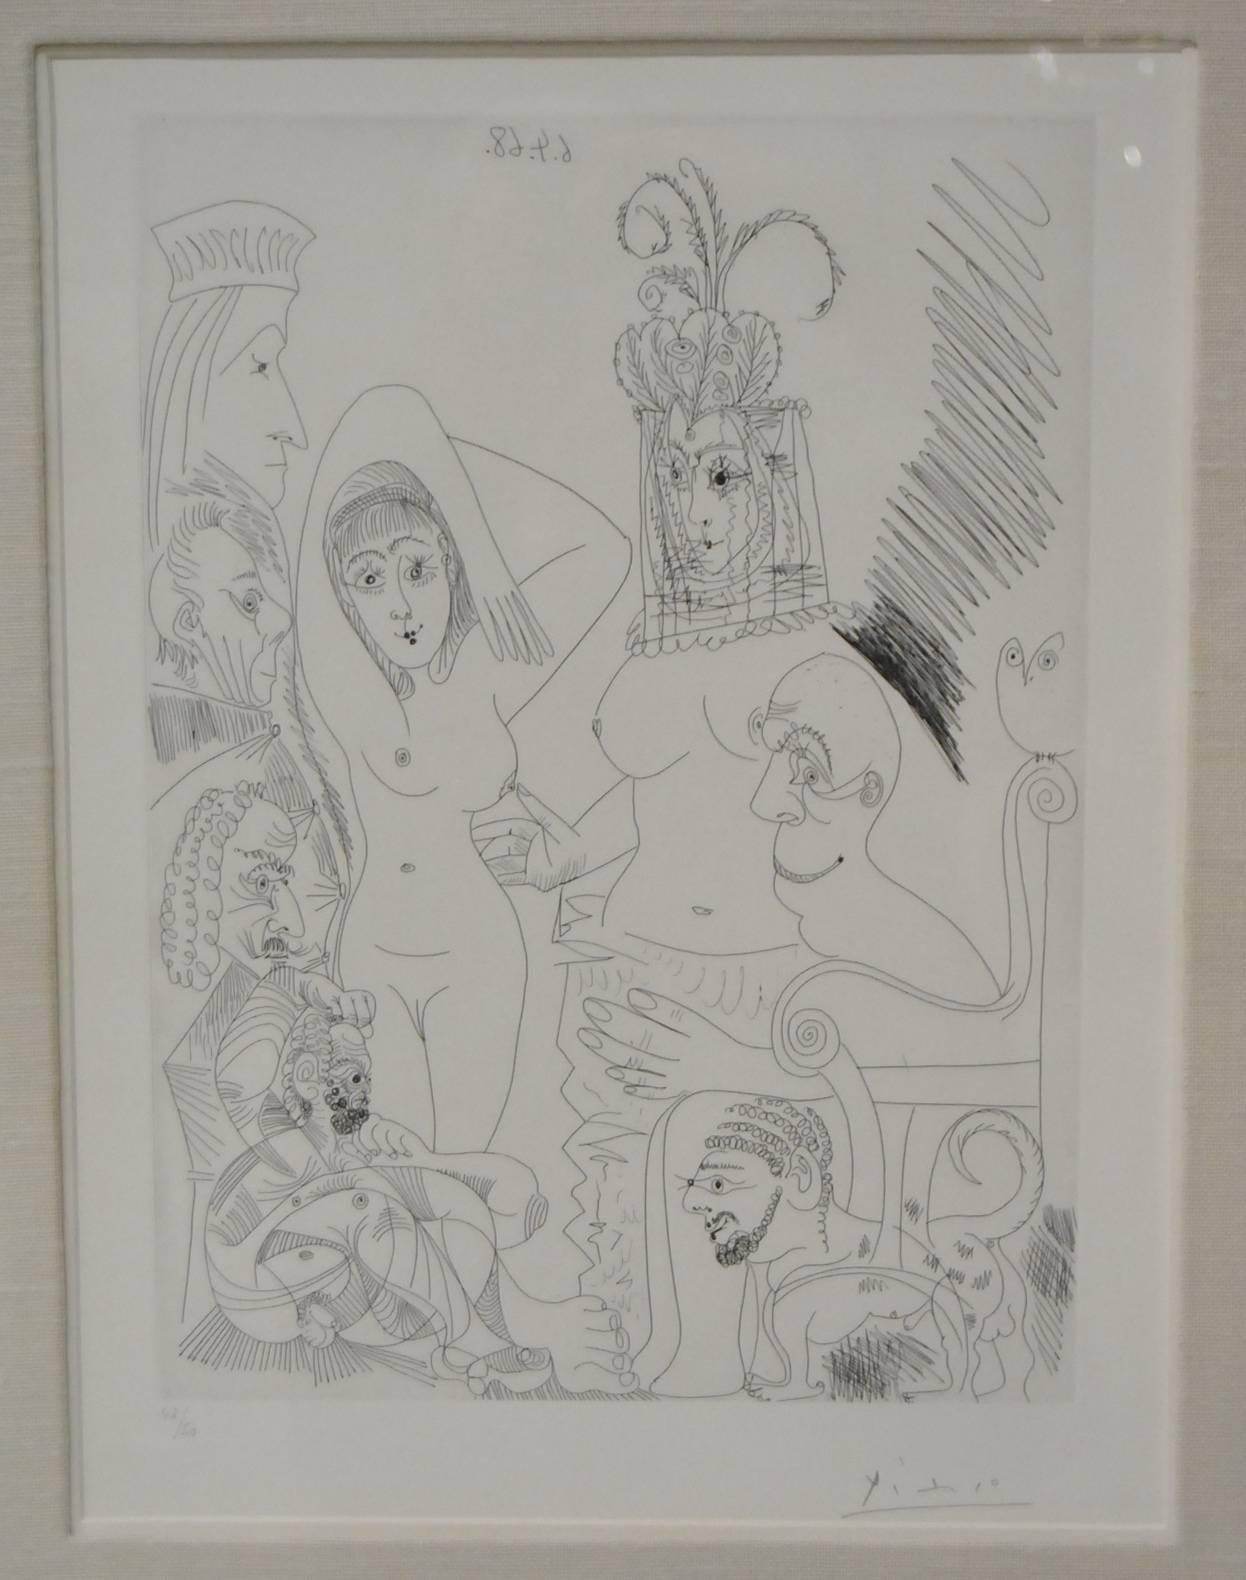 A great signed and numbered Pablo Picasso etching.  This is plate #17 from Series 347 .   Etching is bright with no foxing or staining.  Signed in pencil on the right and numbered 43/50 on the left.  It is in its original frame with Gallery tag: 